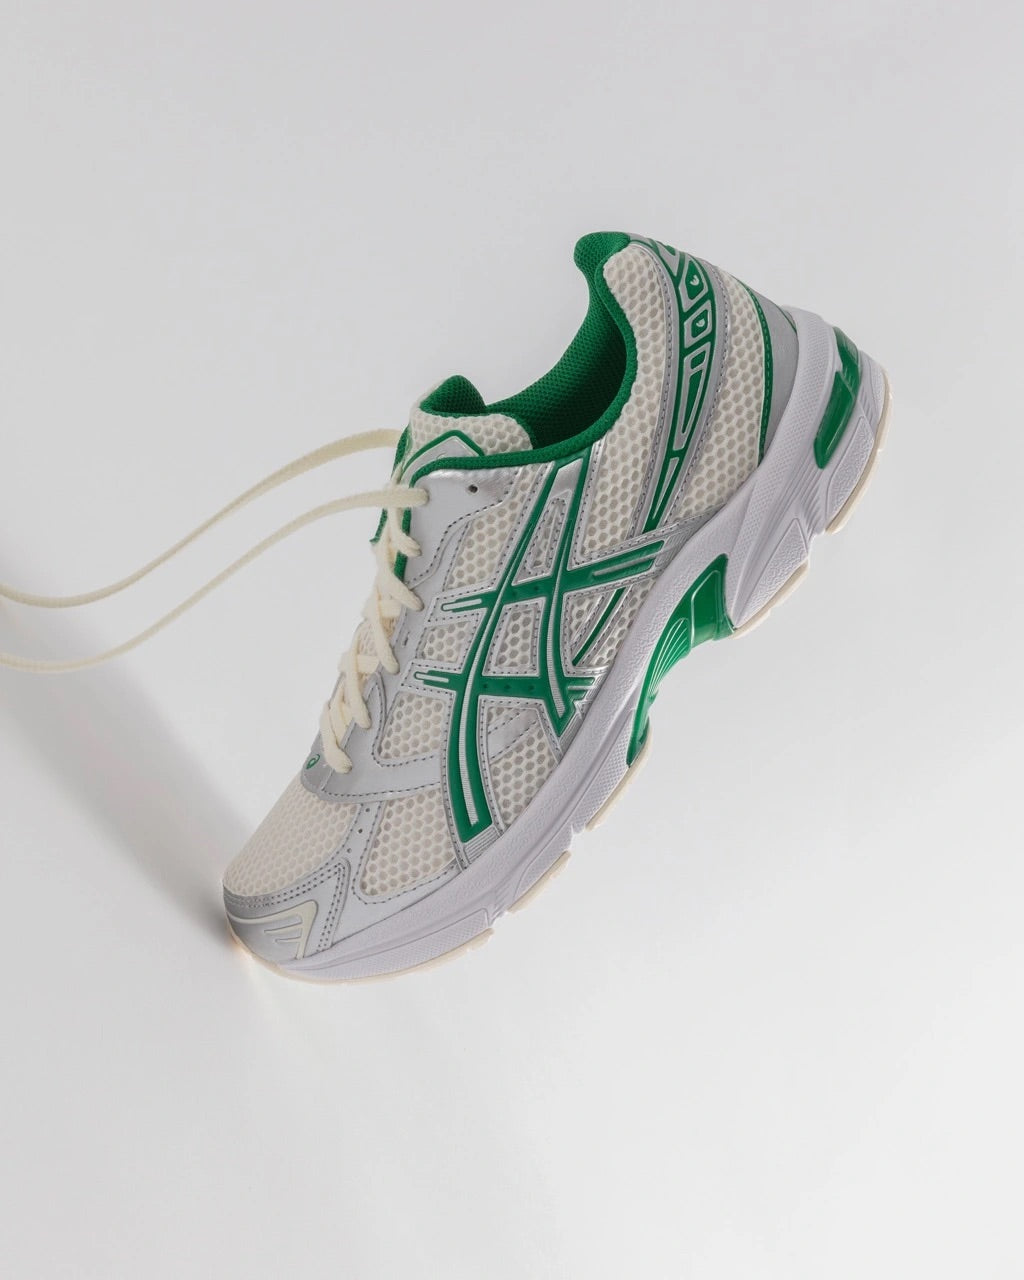 Image of the ASICS GEL-1130 Kale Pack sitting on its toe with the laces unlaced on a studio white background